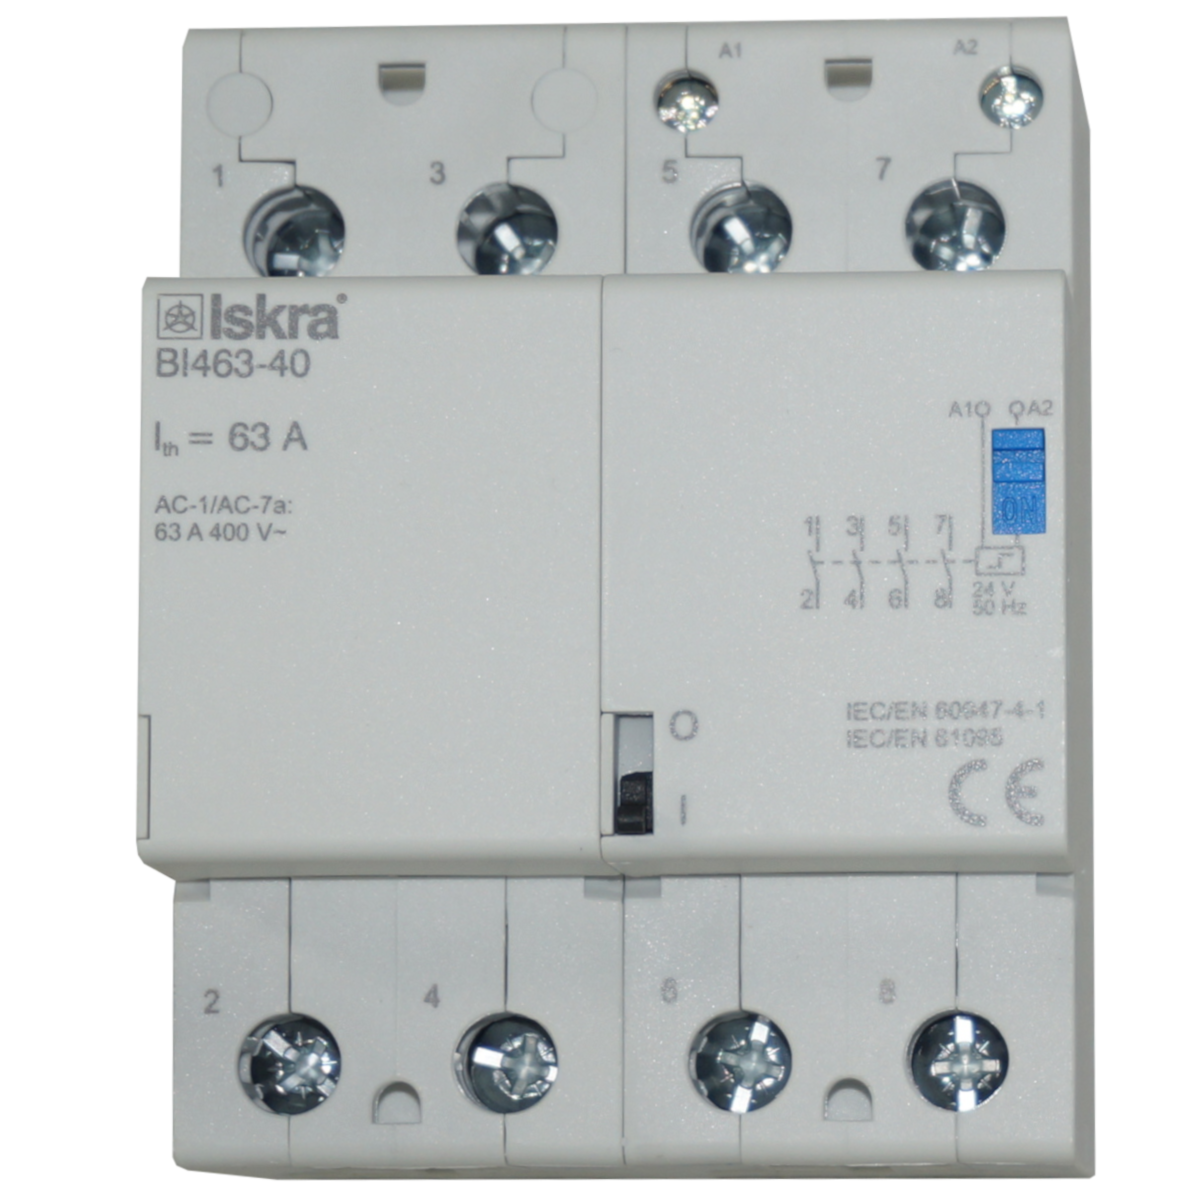 BI463-40-24VAC, Four Pole 4 x SPST NO Bistable Switch/Latching Relay with Manual Control, 440VAC, 63 Amp 24VAC Coil Voltage (Resistive)